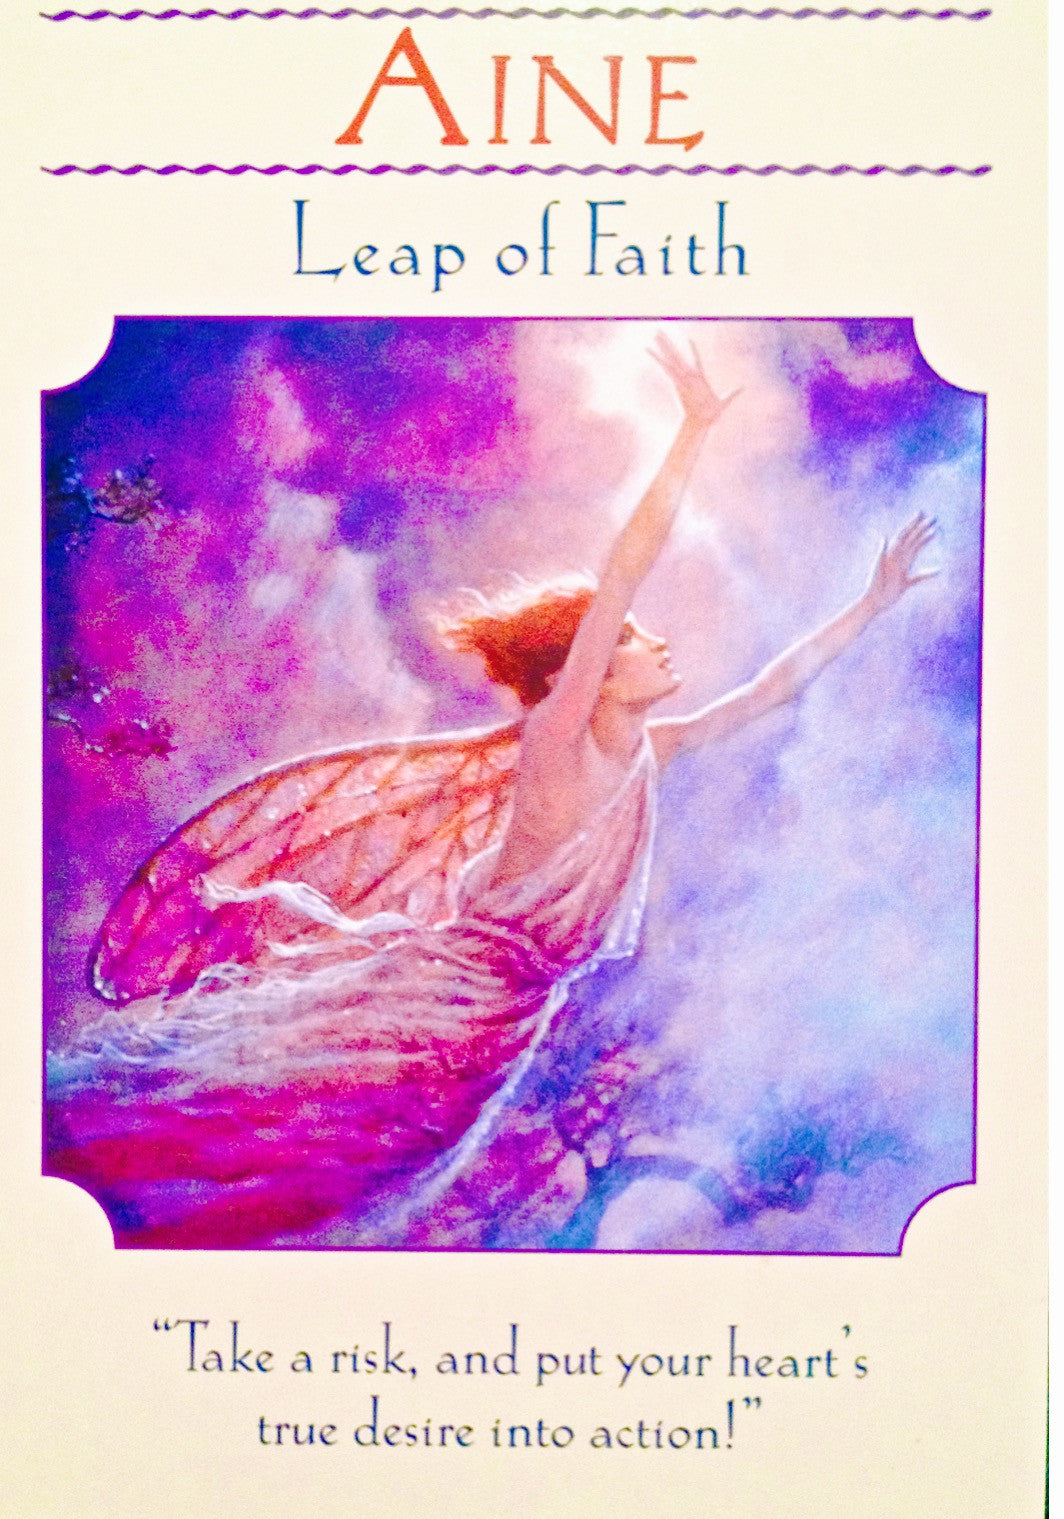 Aine ~ Leap of Faith: “Take a risk, and put your heart’s true desire into action!”